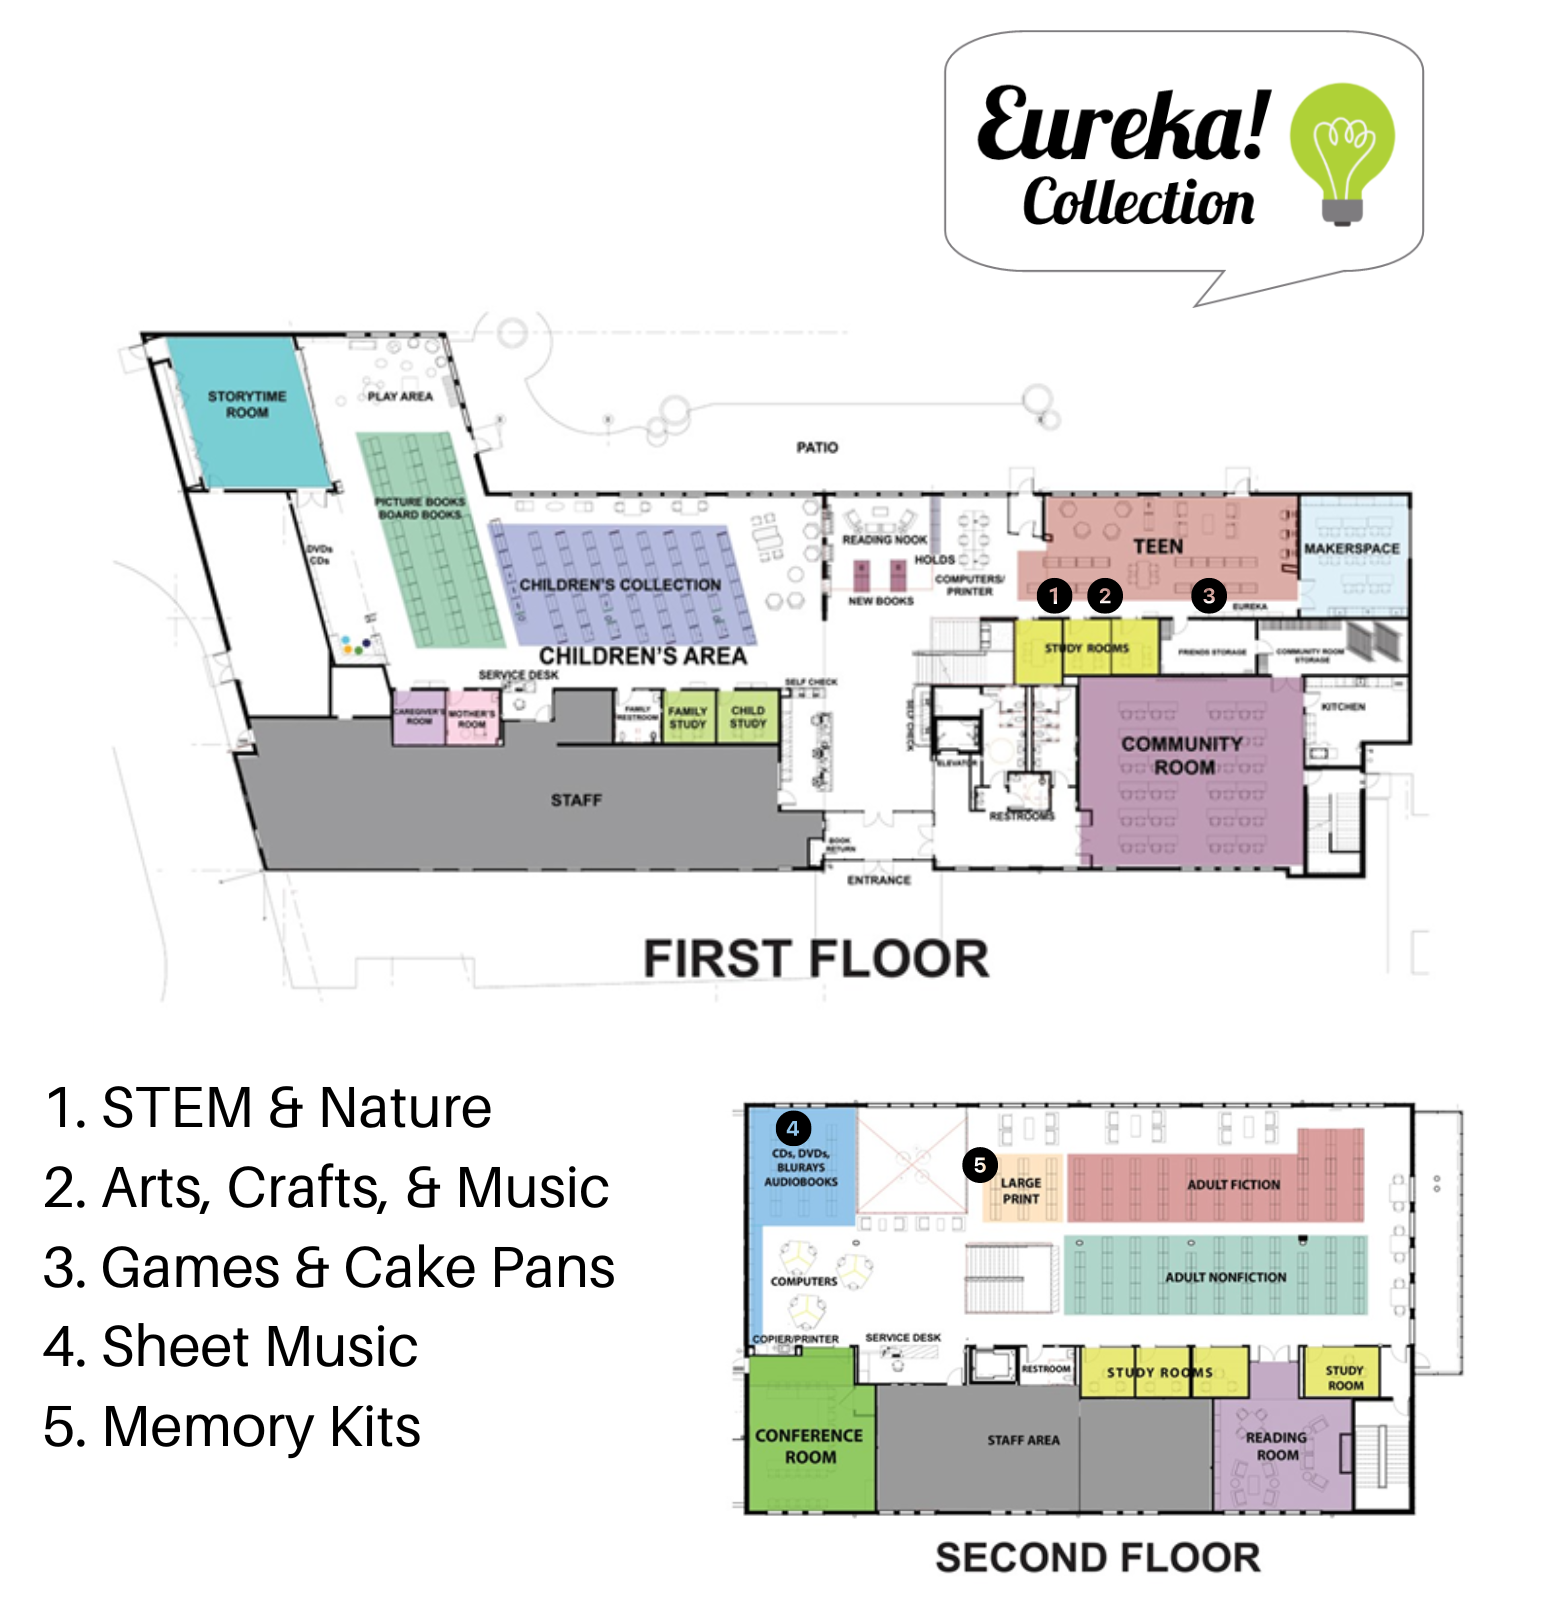 Map of Eureka location in new library